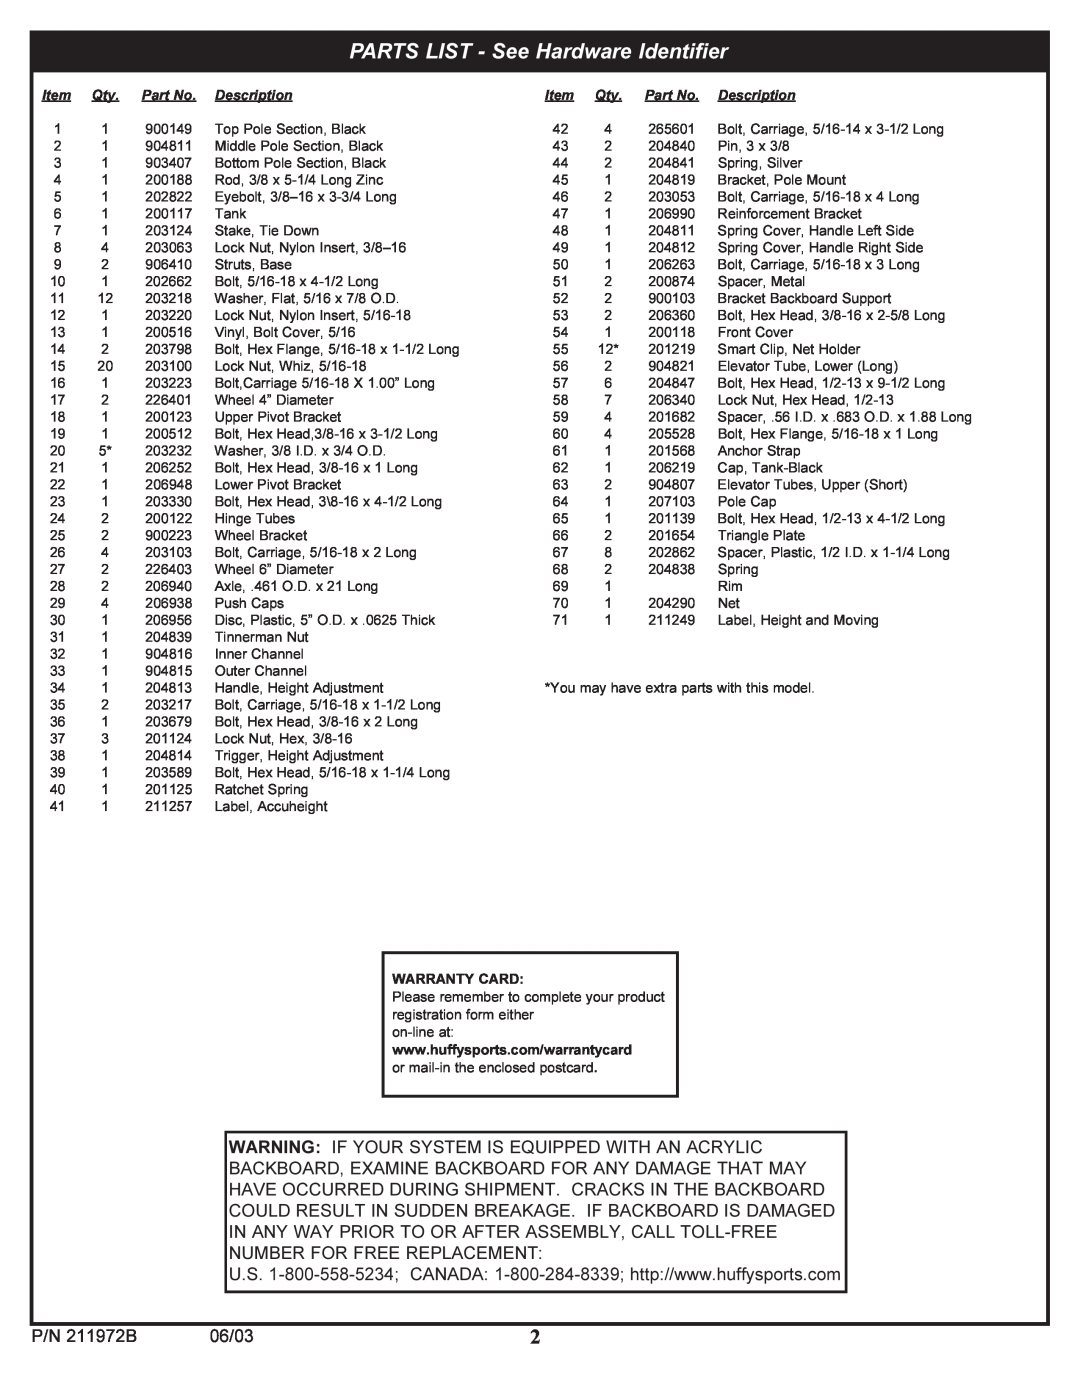 Huffy PARTS LIST - See Hardware Identifier, Warning If Your System Is Equipped With An Acrylic, P/N 211972B, 06/03 